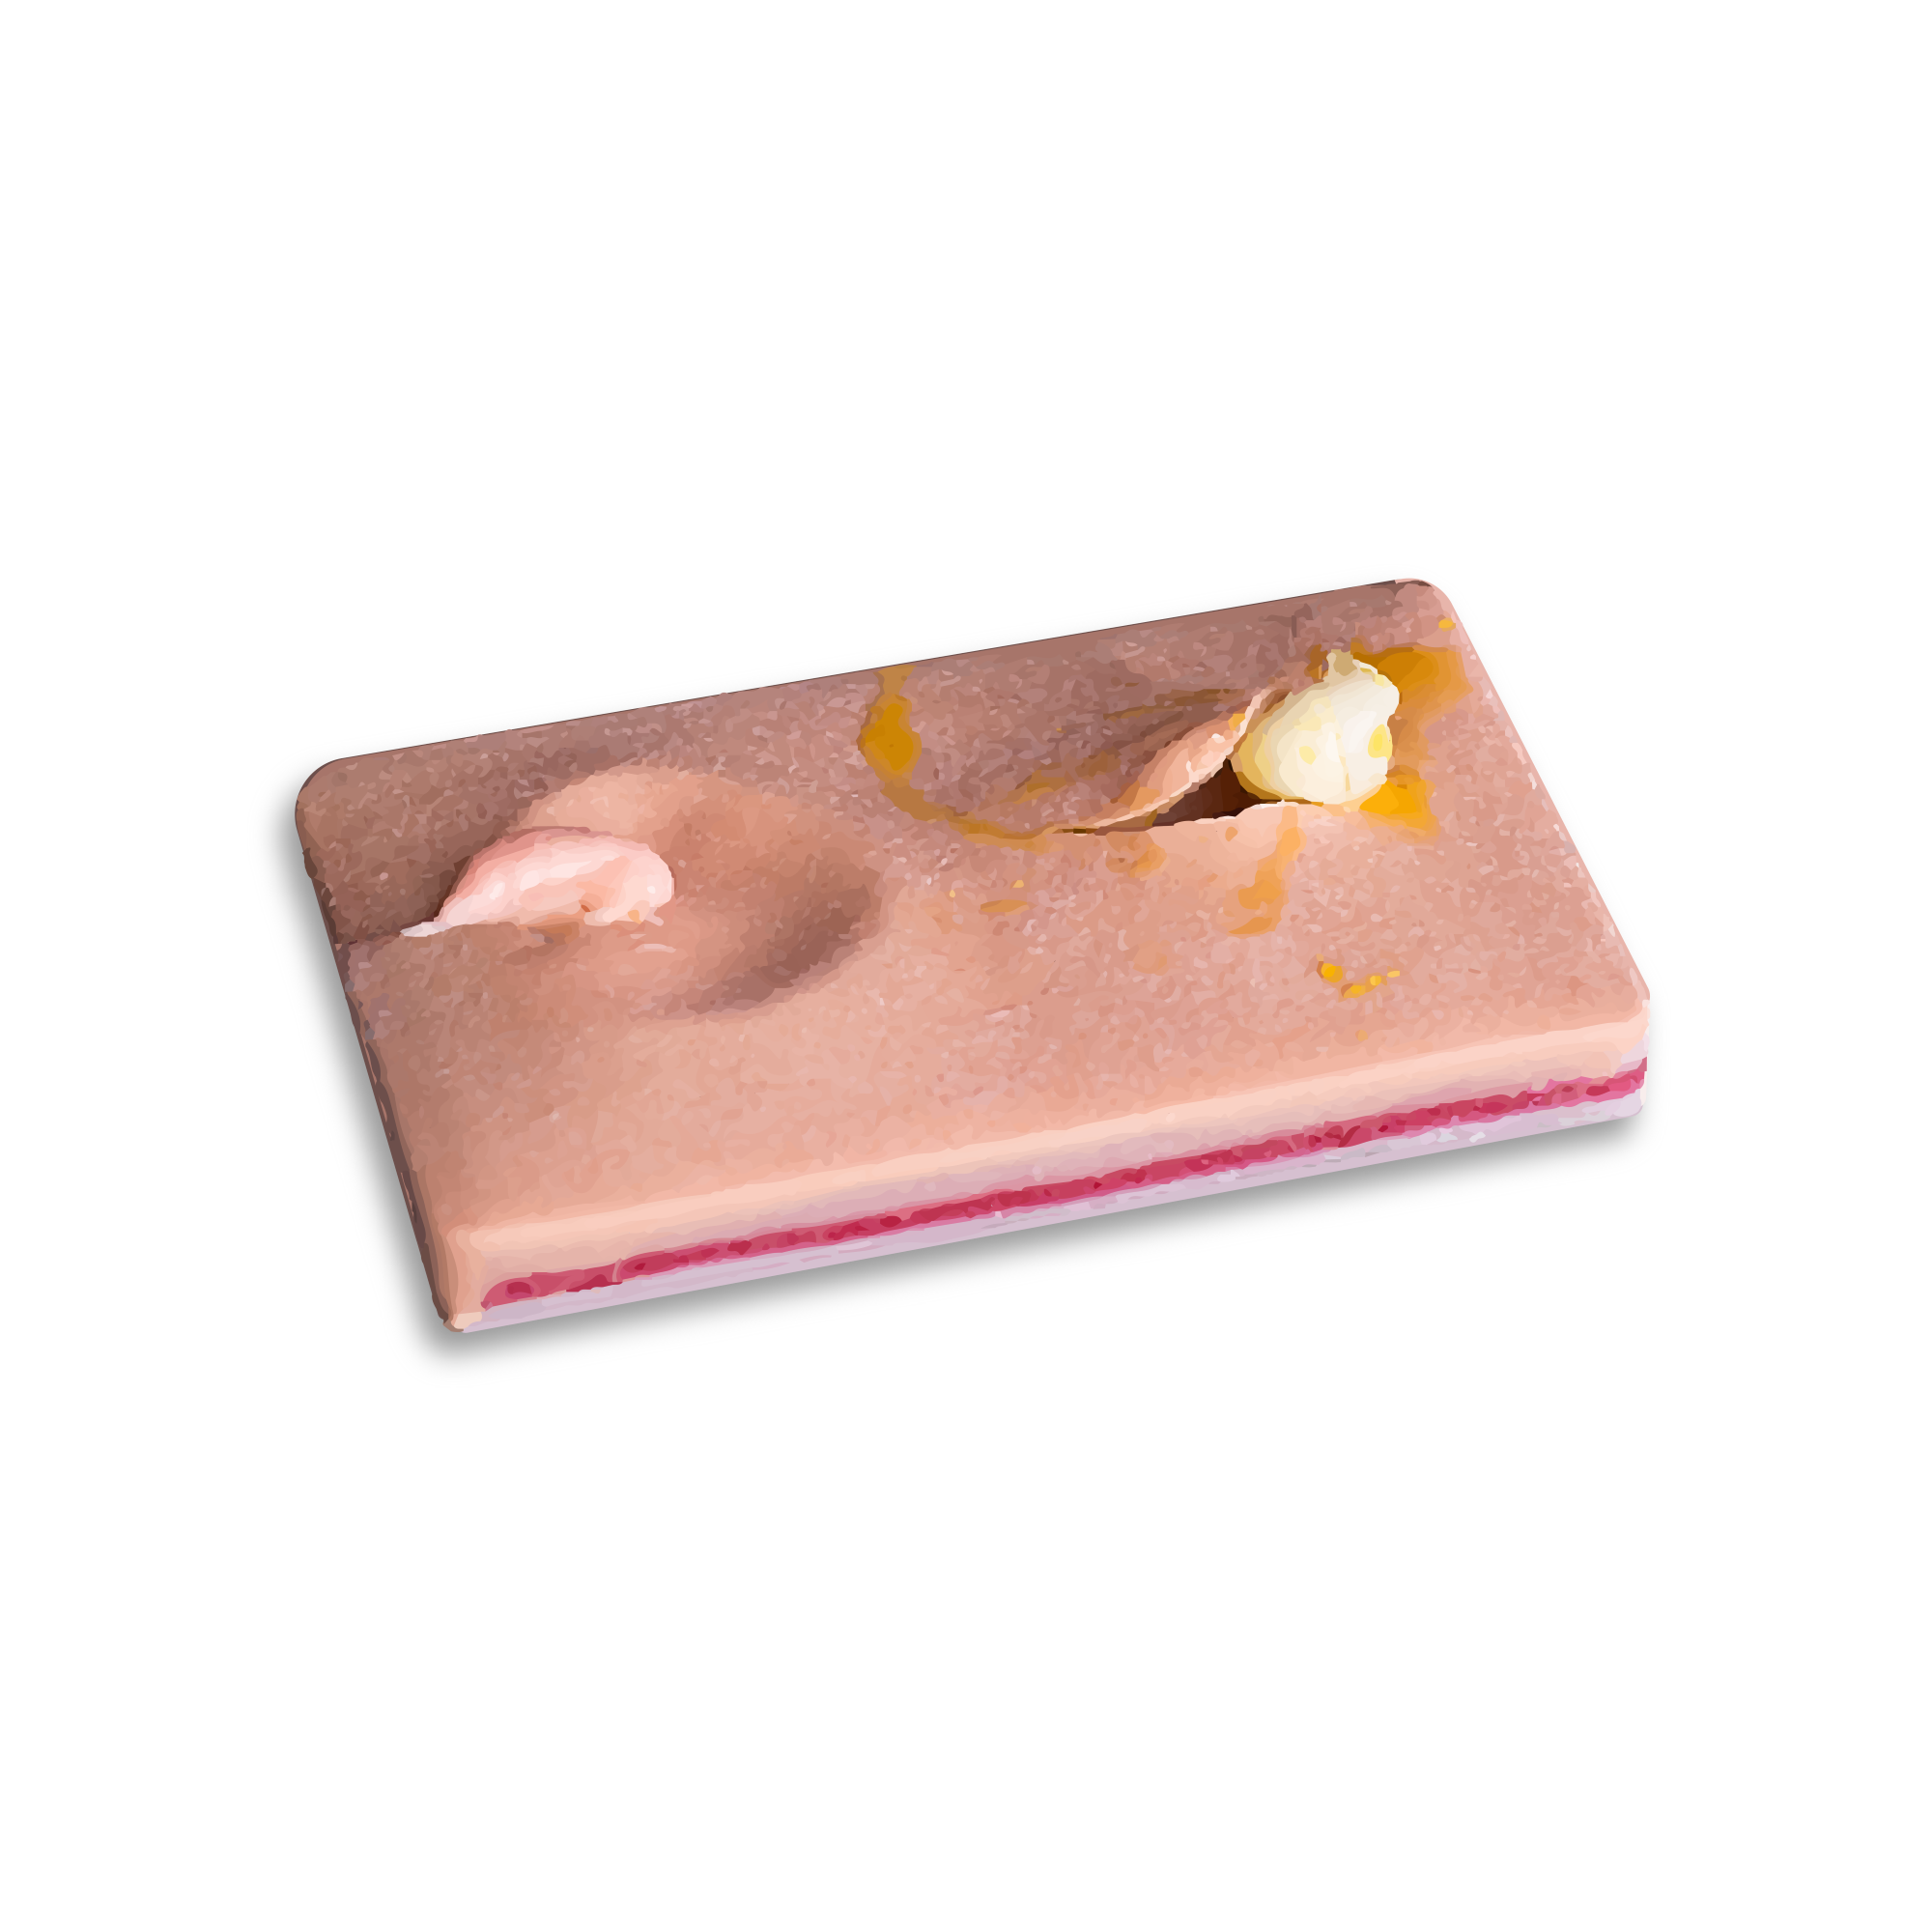 I&D Simulated Cyst/Abscess Tissue Pad